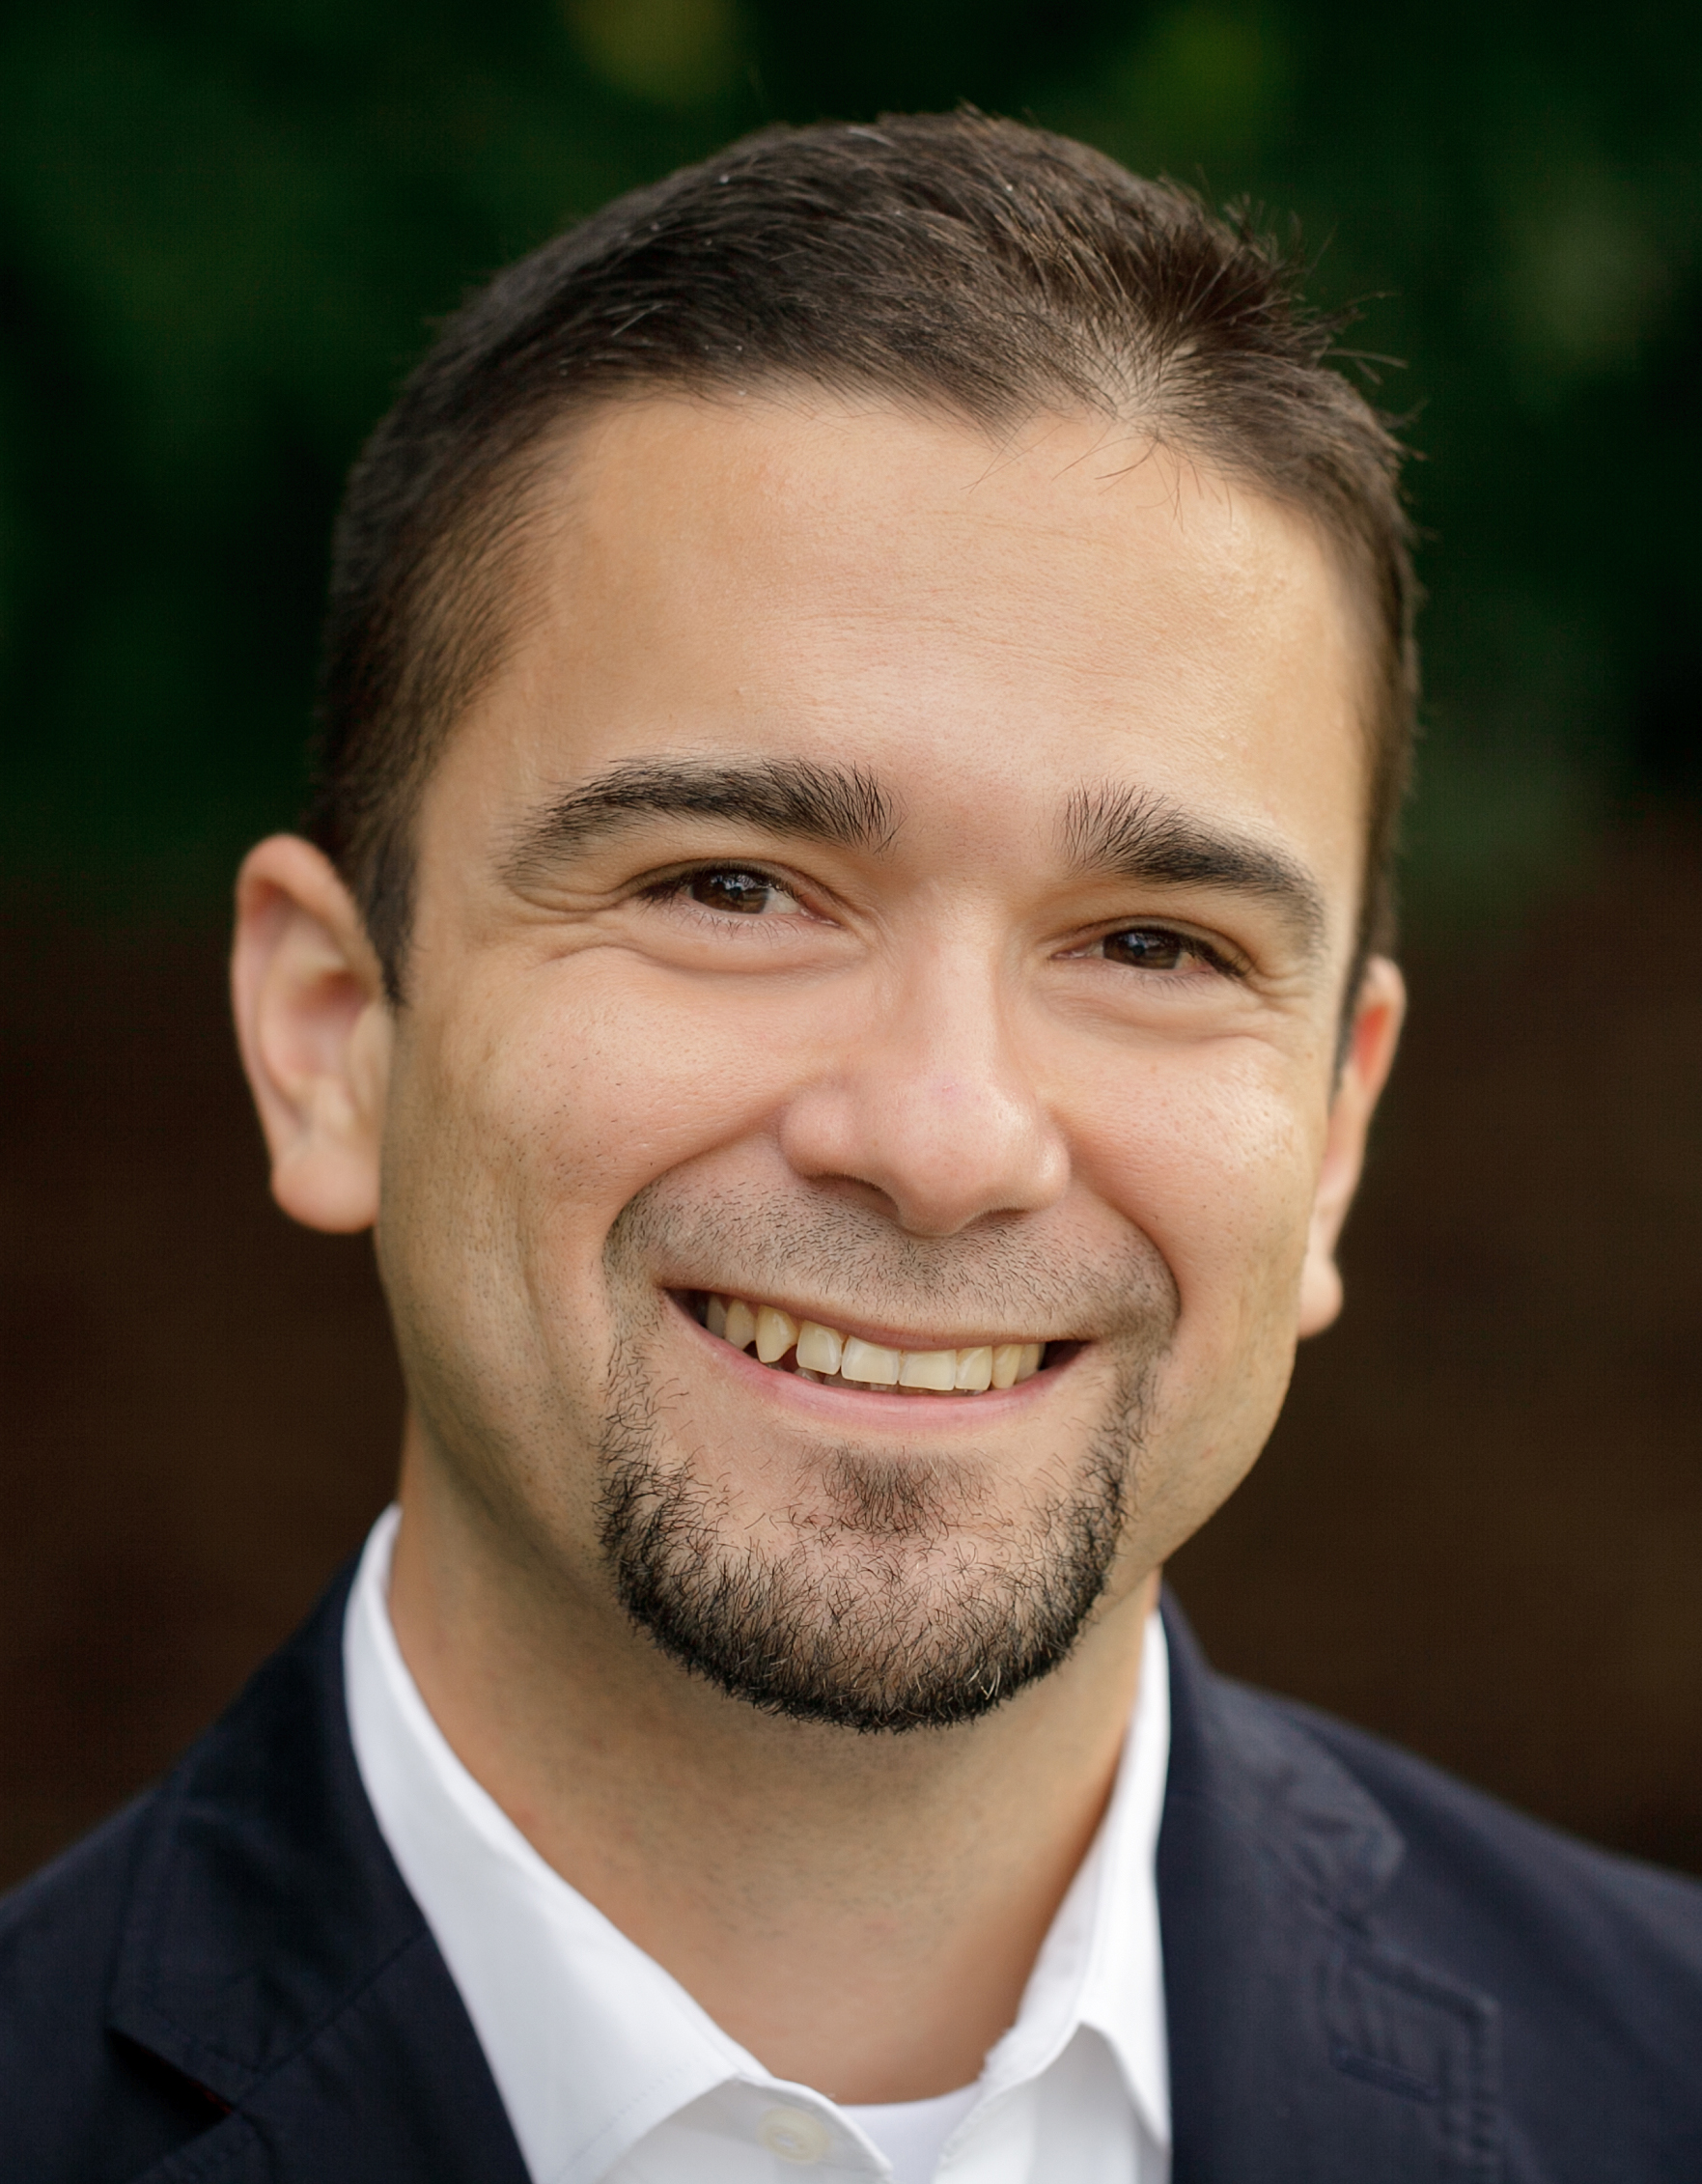 Felipe Hinojosa, associate professor in the History Department at Texas A&M University, College Station, Texas, and author of Latino Mennonites: Civil Rights, Faith & Evangelical Culture, which won the 2015 Américo Paredes Book Award. (Photo provided)